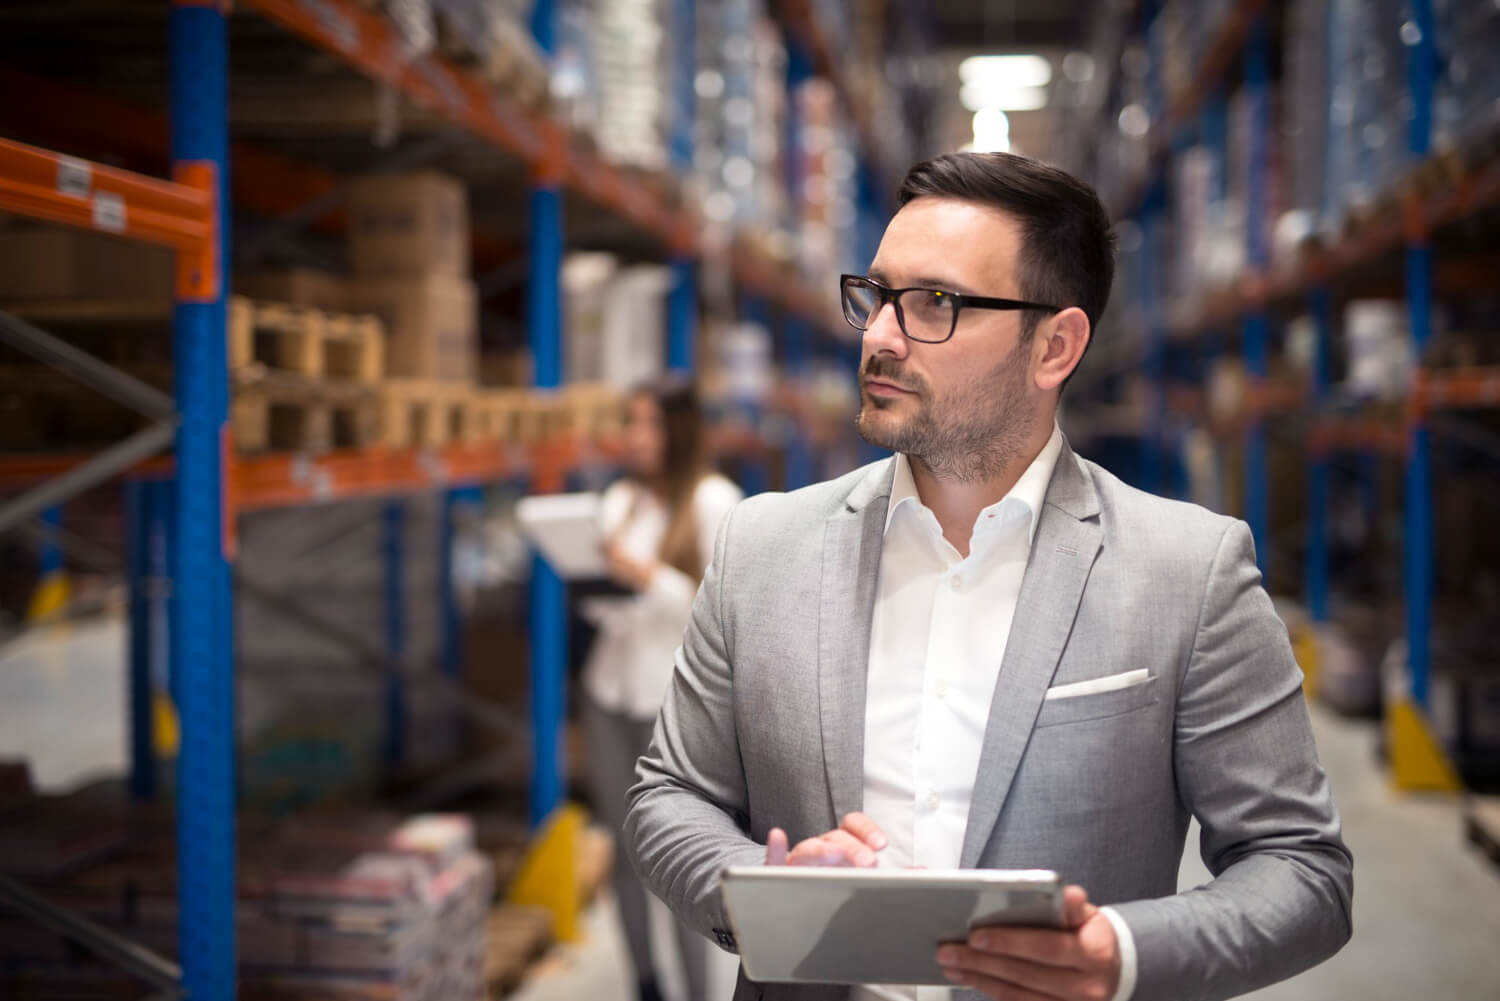 portrait successful businessman manager ceo holding tablet walking through warehouse storage area looking towards shelves